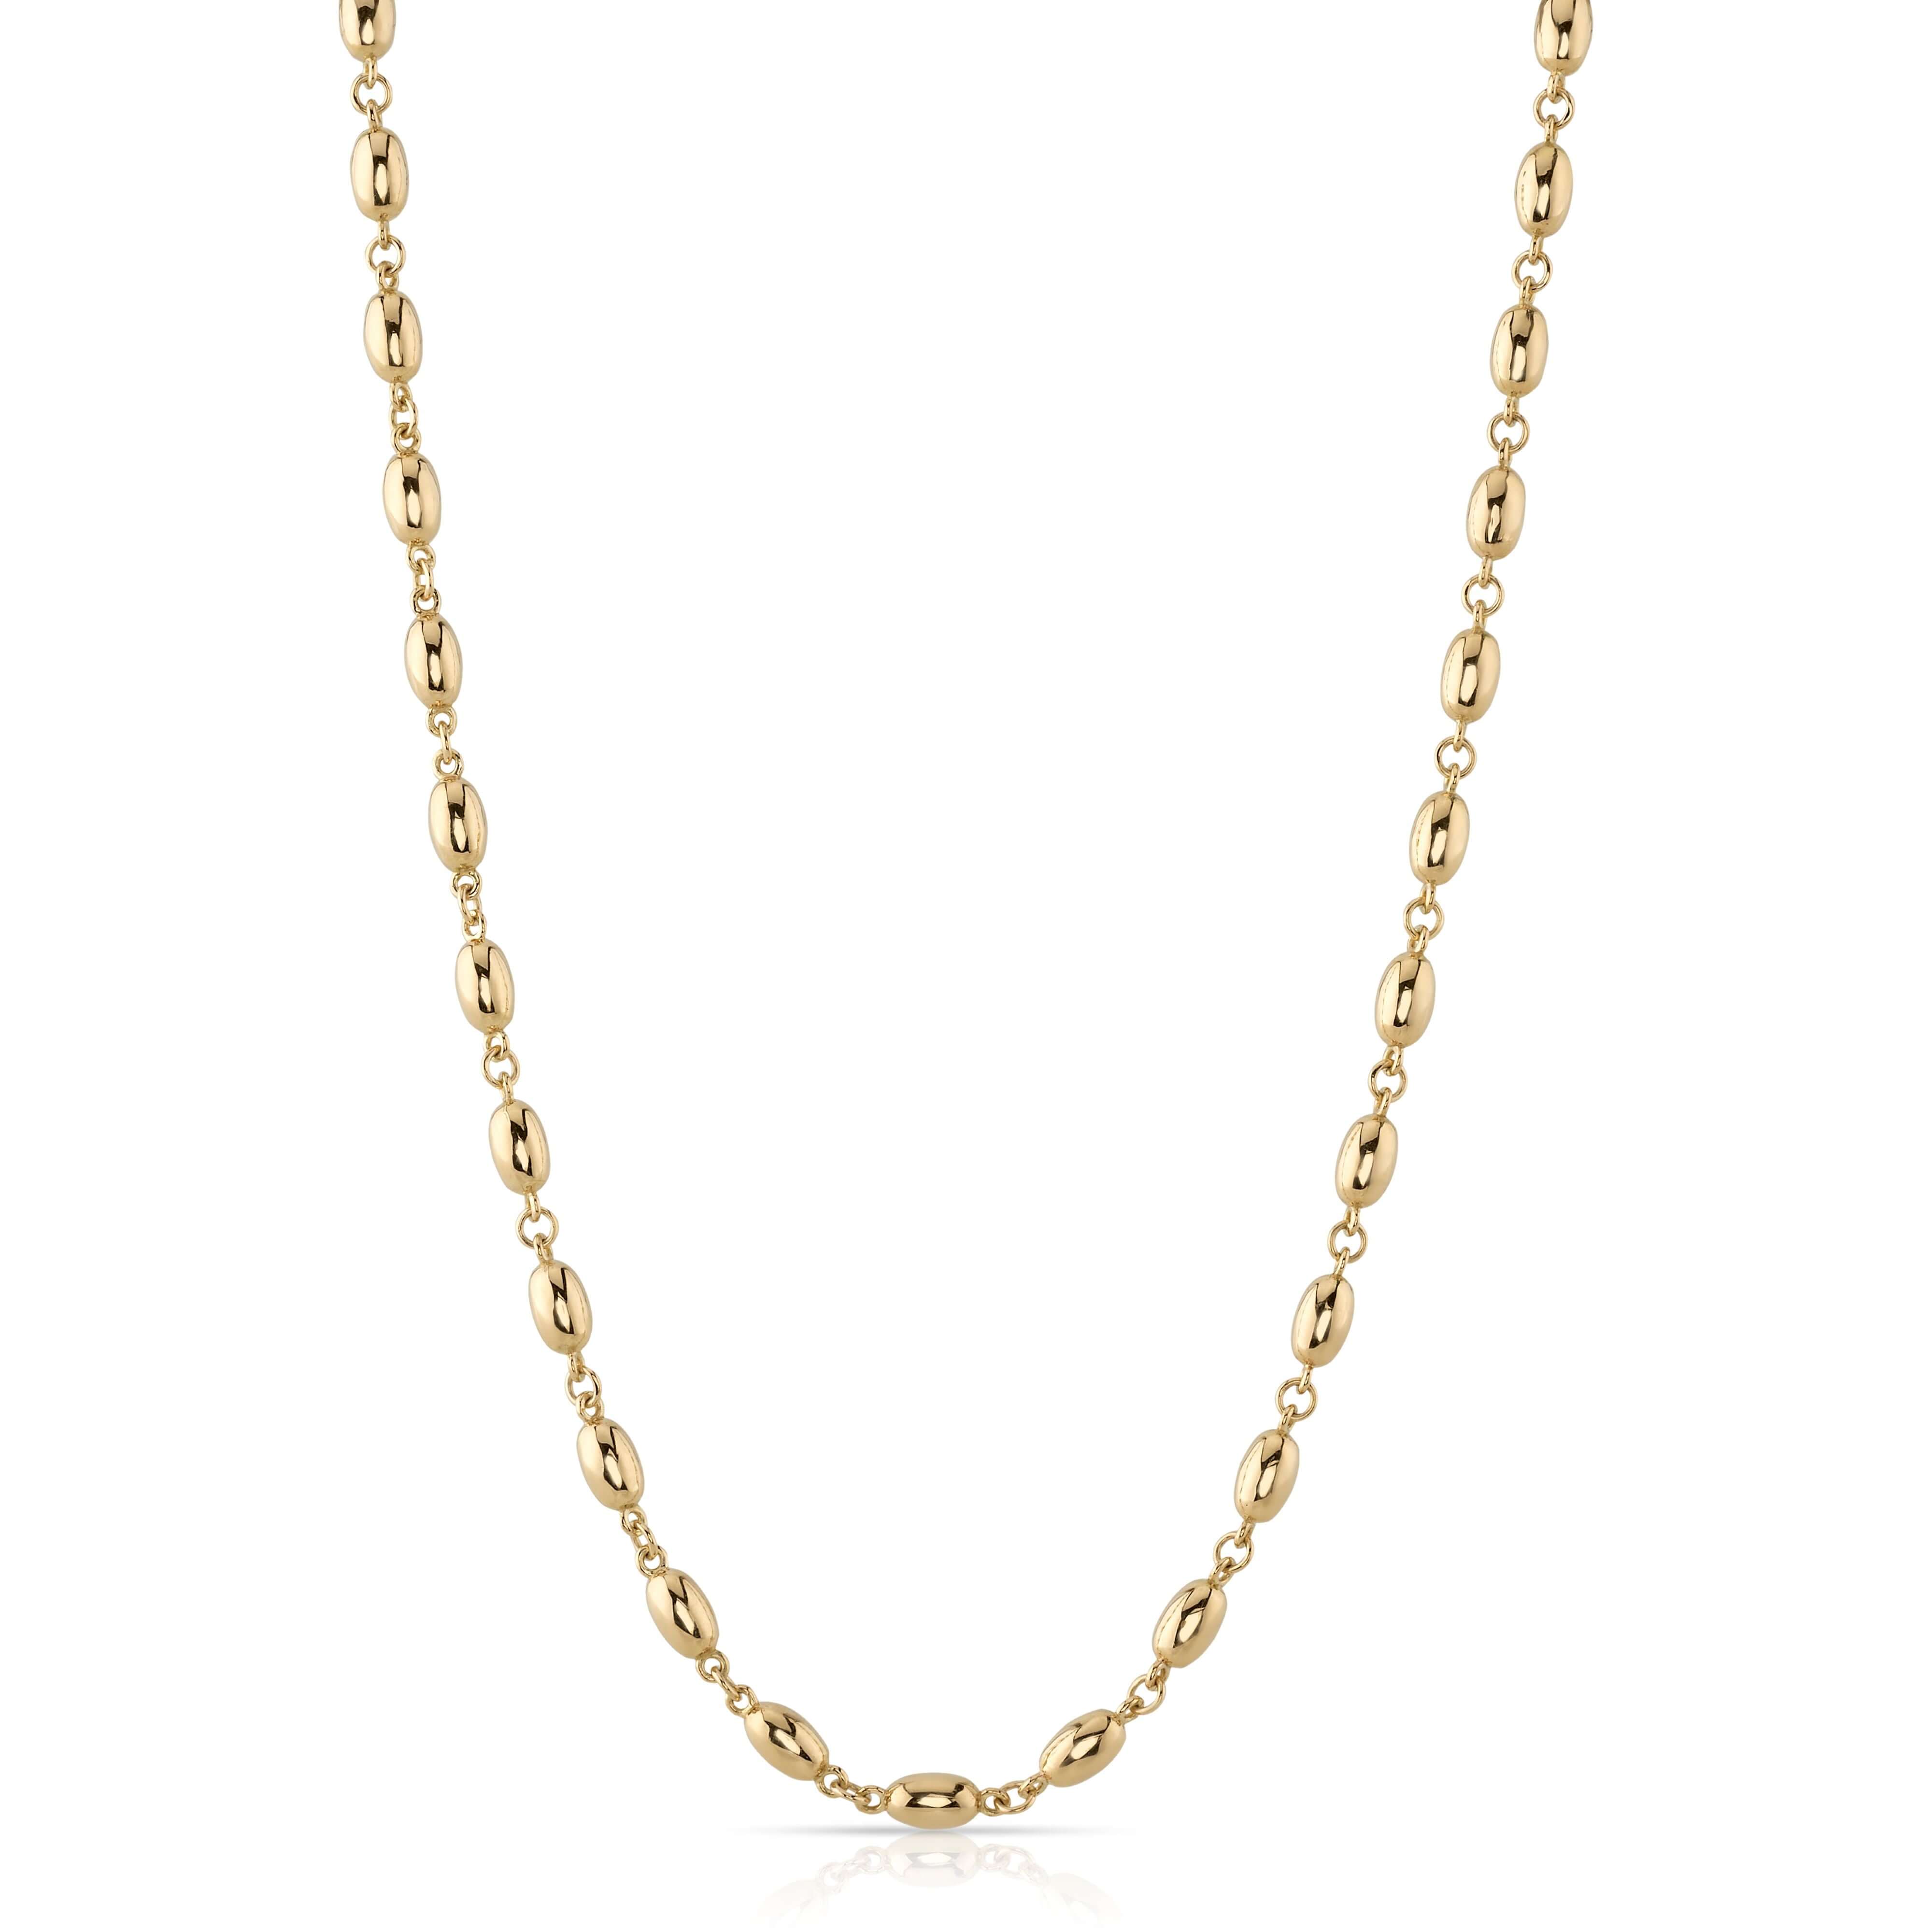 SINGLE STONE LARGE DOROTHY NECKLACE featuring Handcrafted 18K yellow gold large oval rosary bead necklace. Price does not include charms. Available in 17" and 18" lengths.